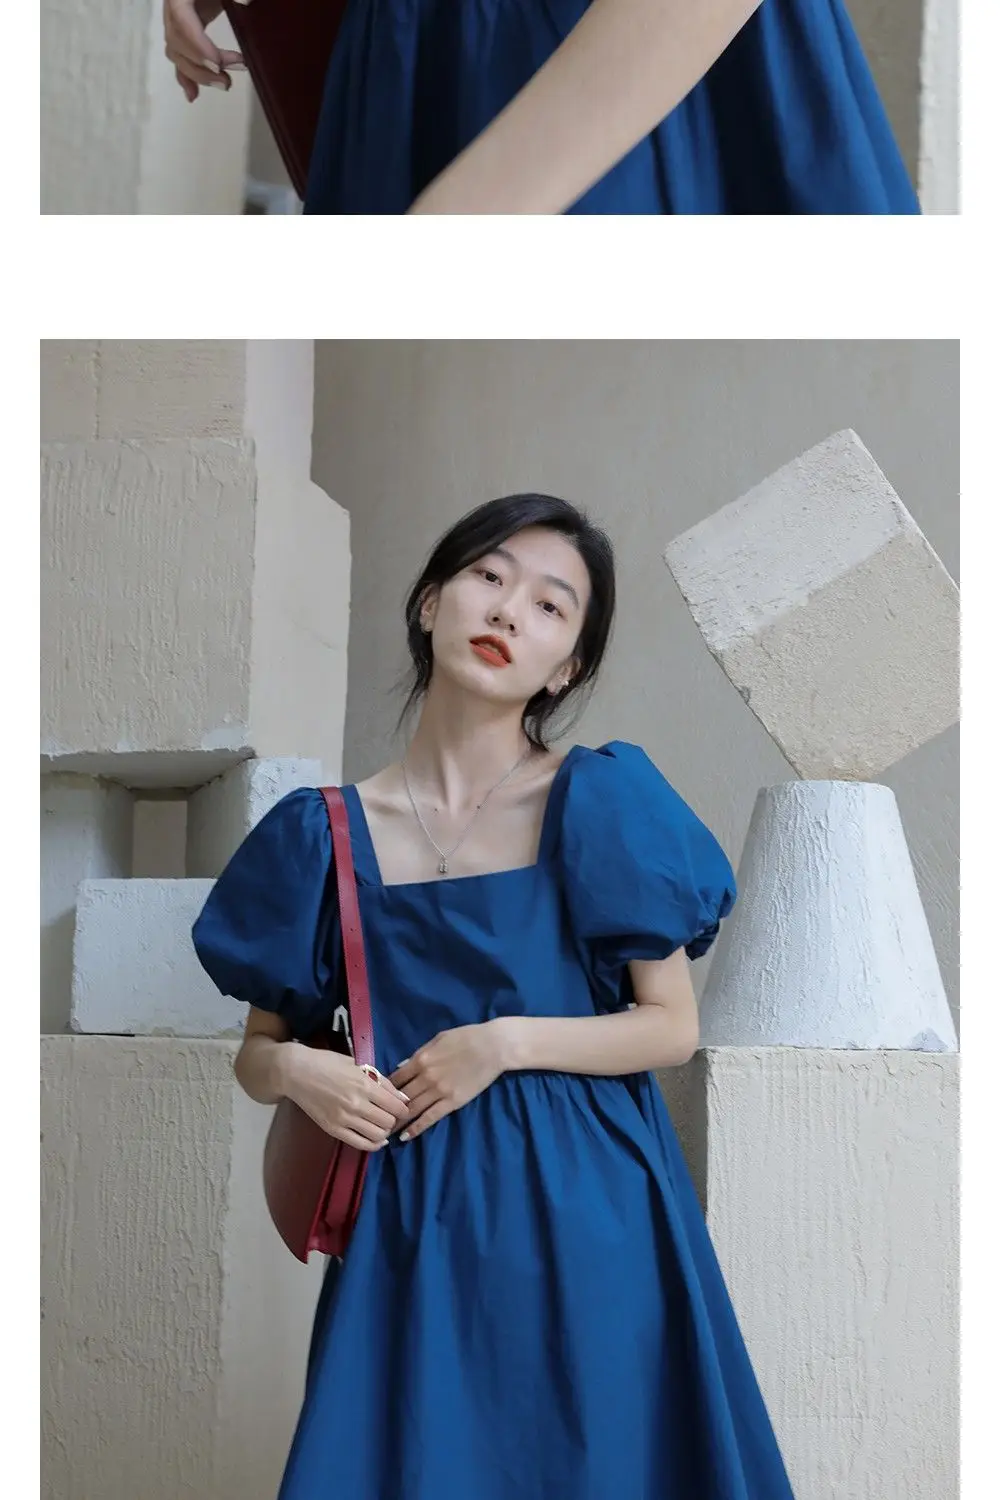 Dress Women Pure Puff Sleeve All-match Elegant Square Collar Loose Temperament Fashion 2021 Newest Classy Summer Clothing Tender womens clothes